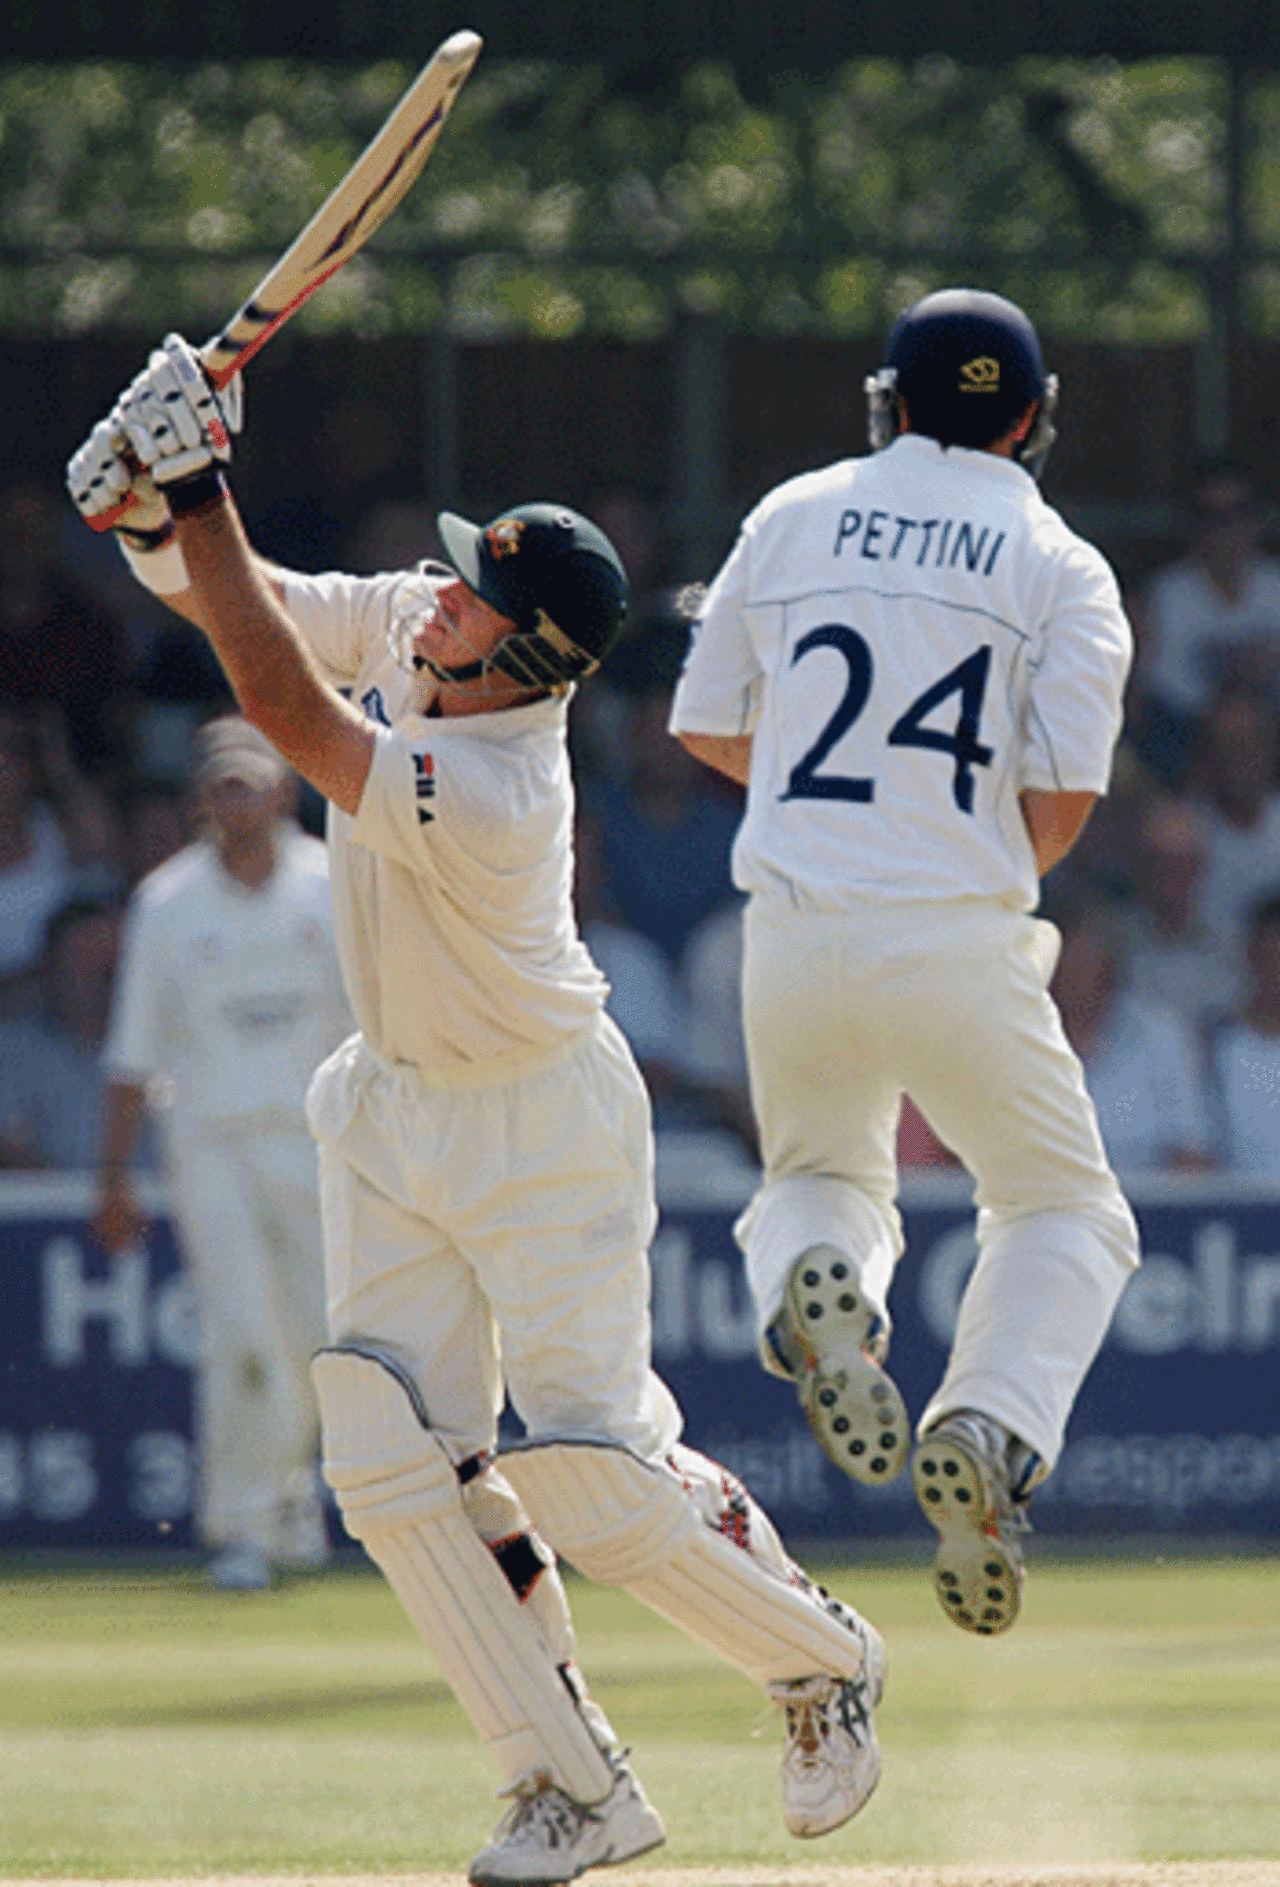 Matthew Hayden launches one of his seven sixes against Essex, Essex v Australia, Chelmsford, September 4, 2005